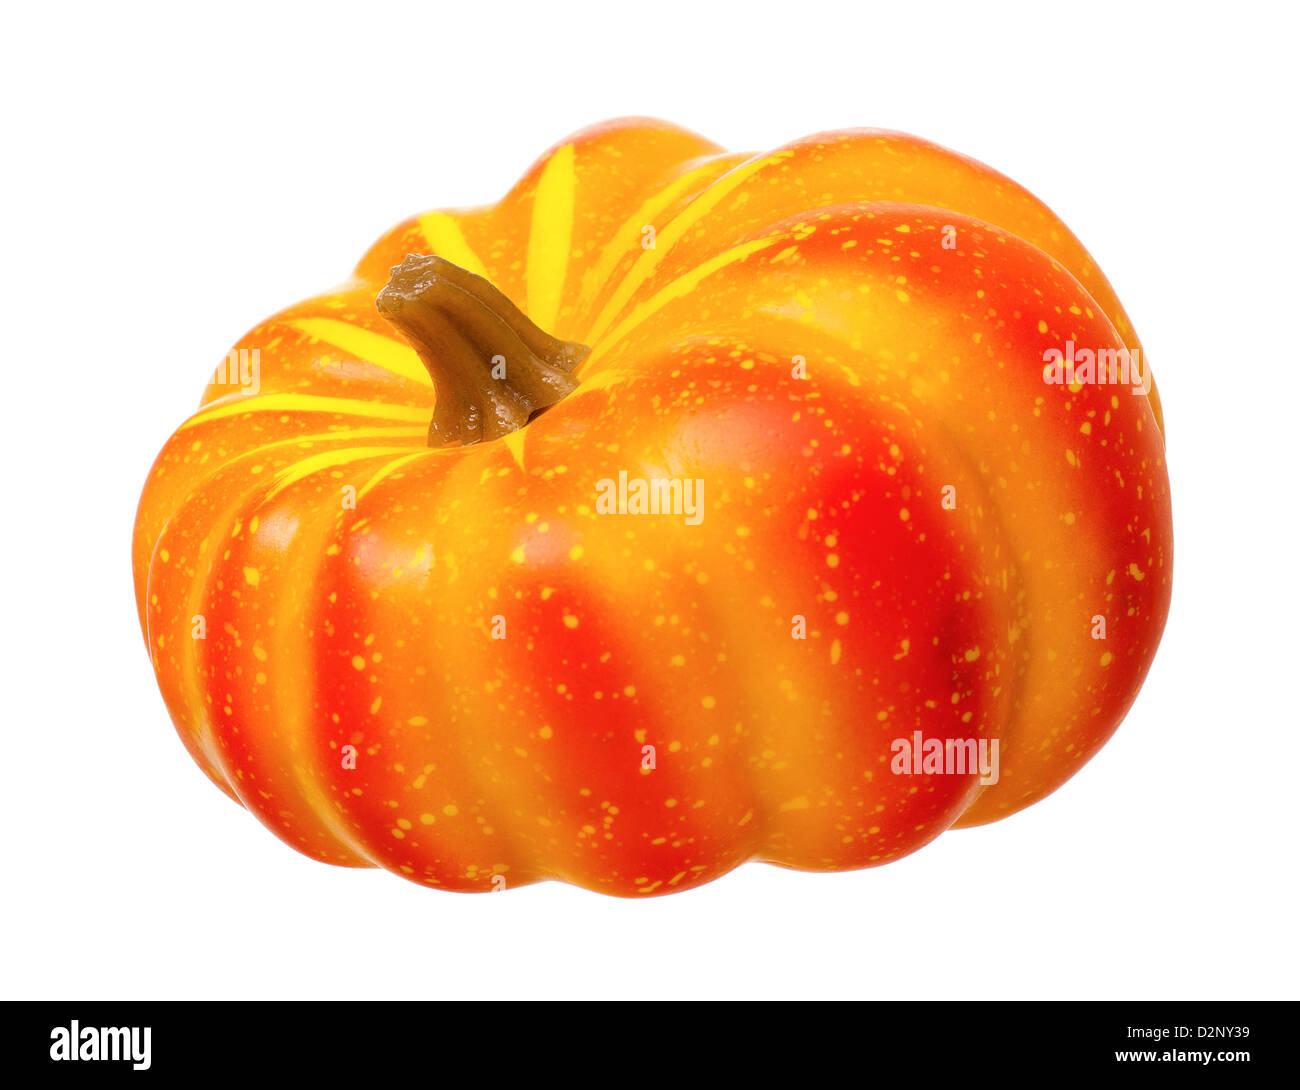 Artificial orange pumpkin, isolated on white background Stock Photo